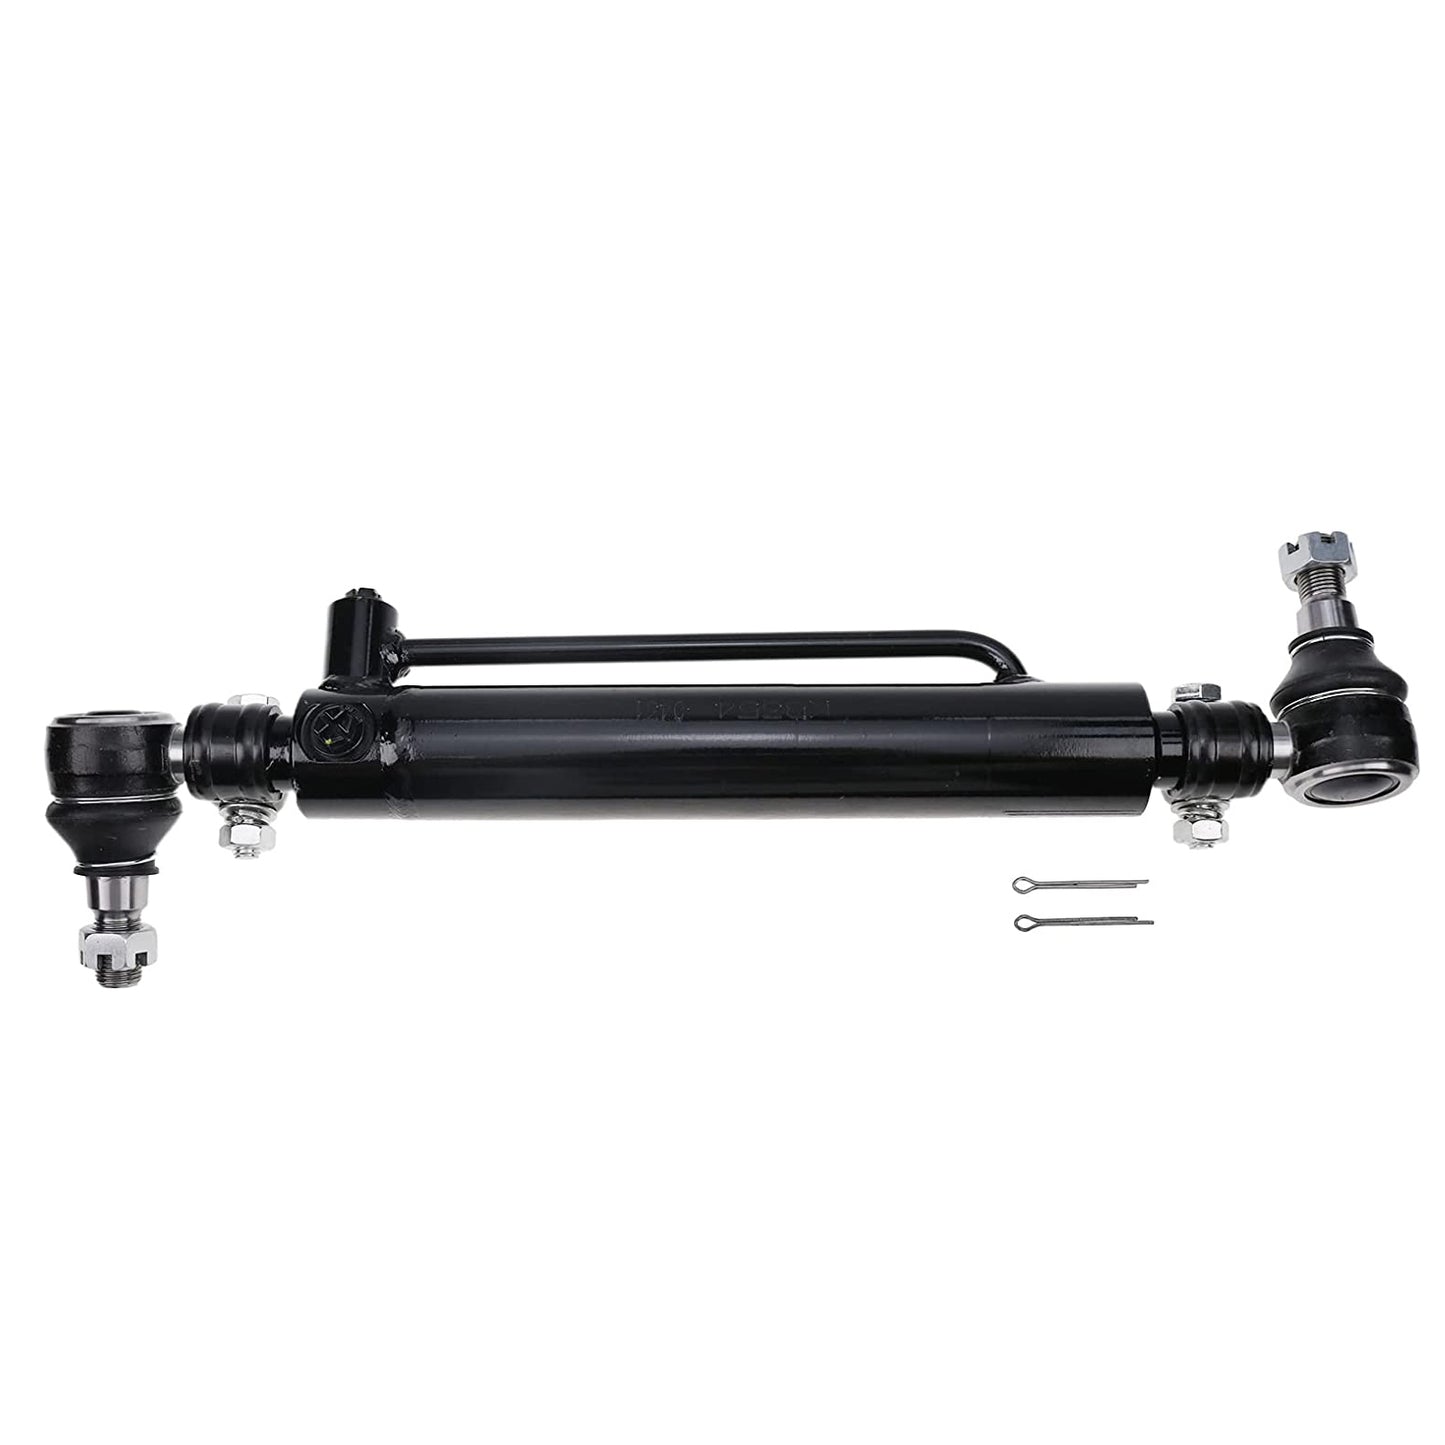 New D128454 234466A1 234447A1 A37859 Power Steering Cylinder Compatible with 2wd Case Construction International Harvester 480 580 584 585 586 B C D E SE F LL 530 530CK